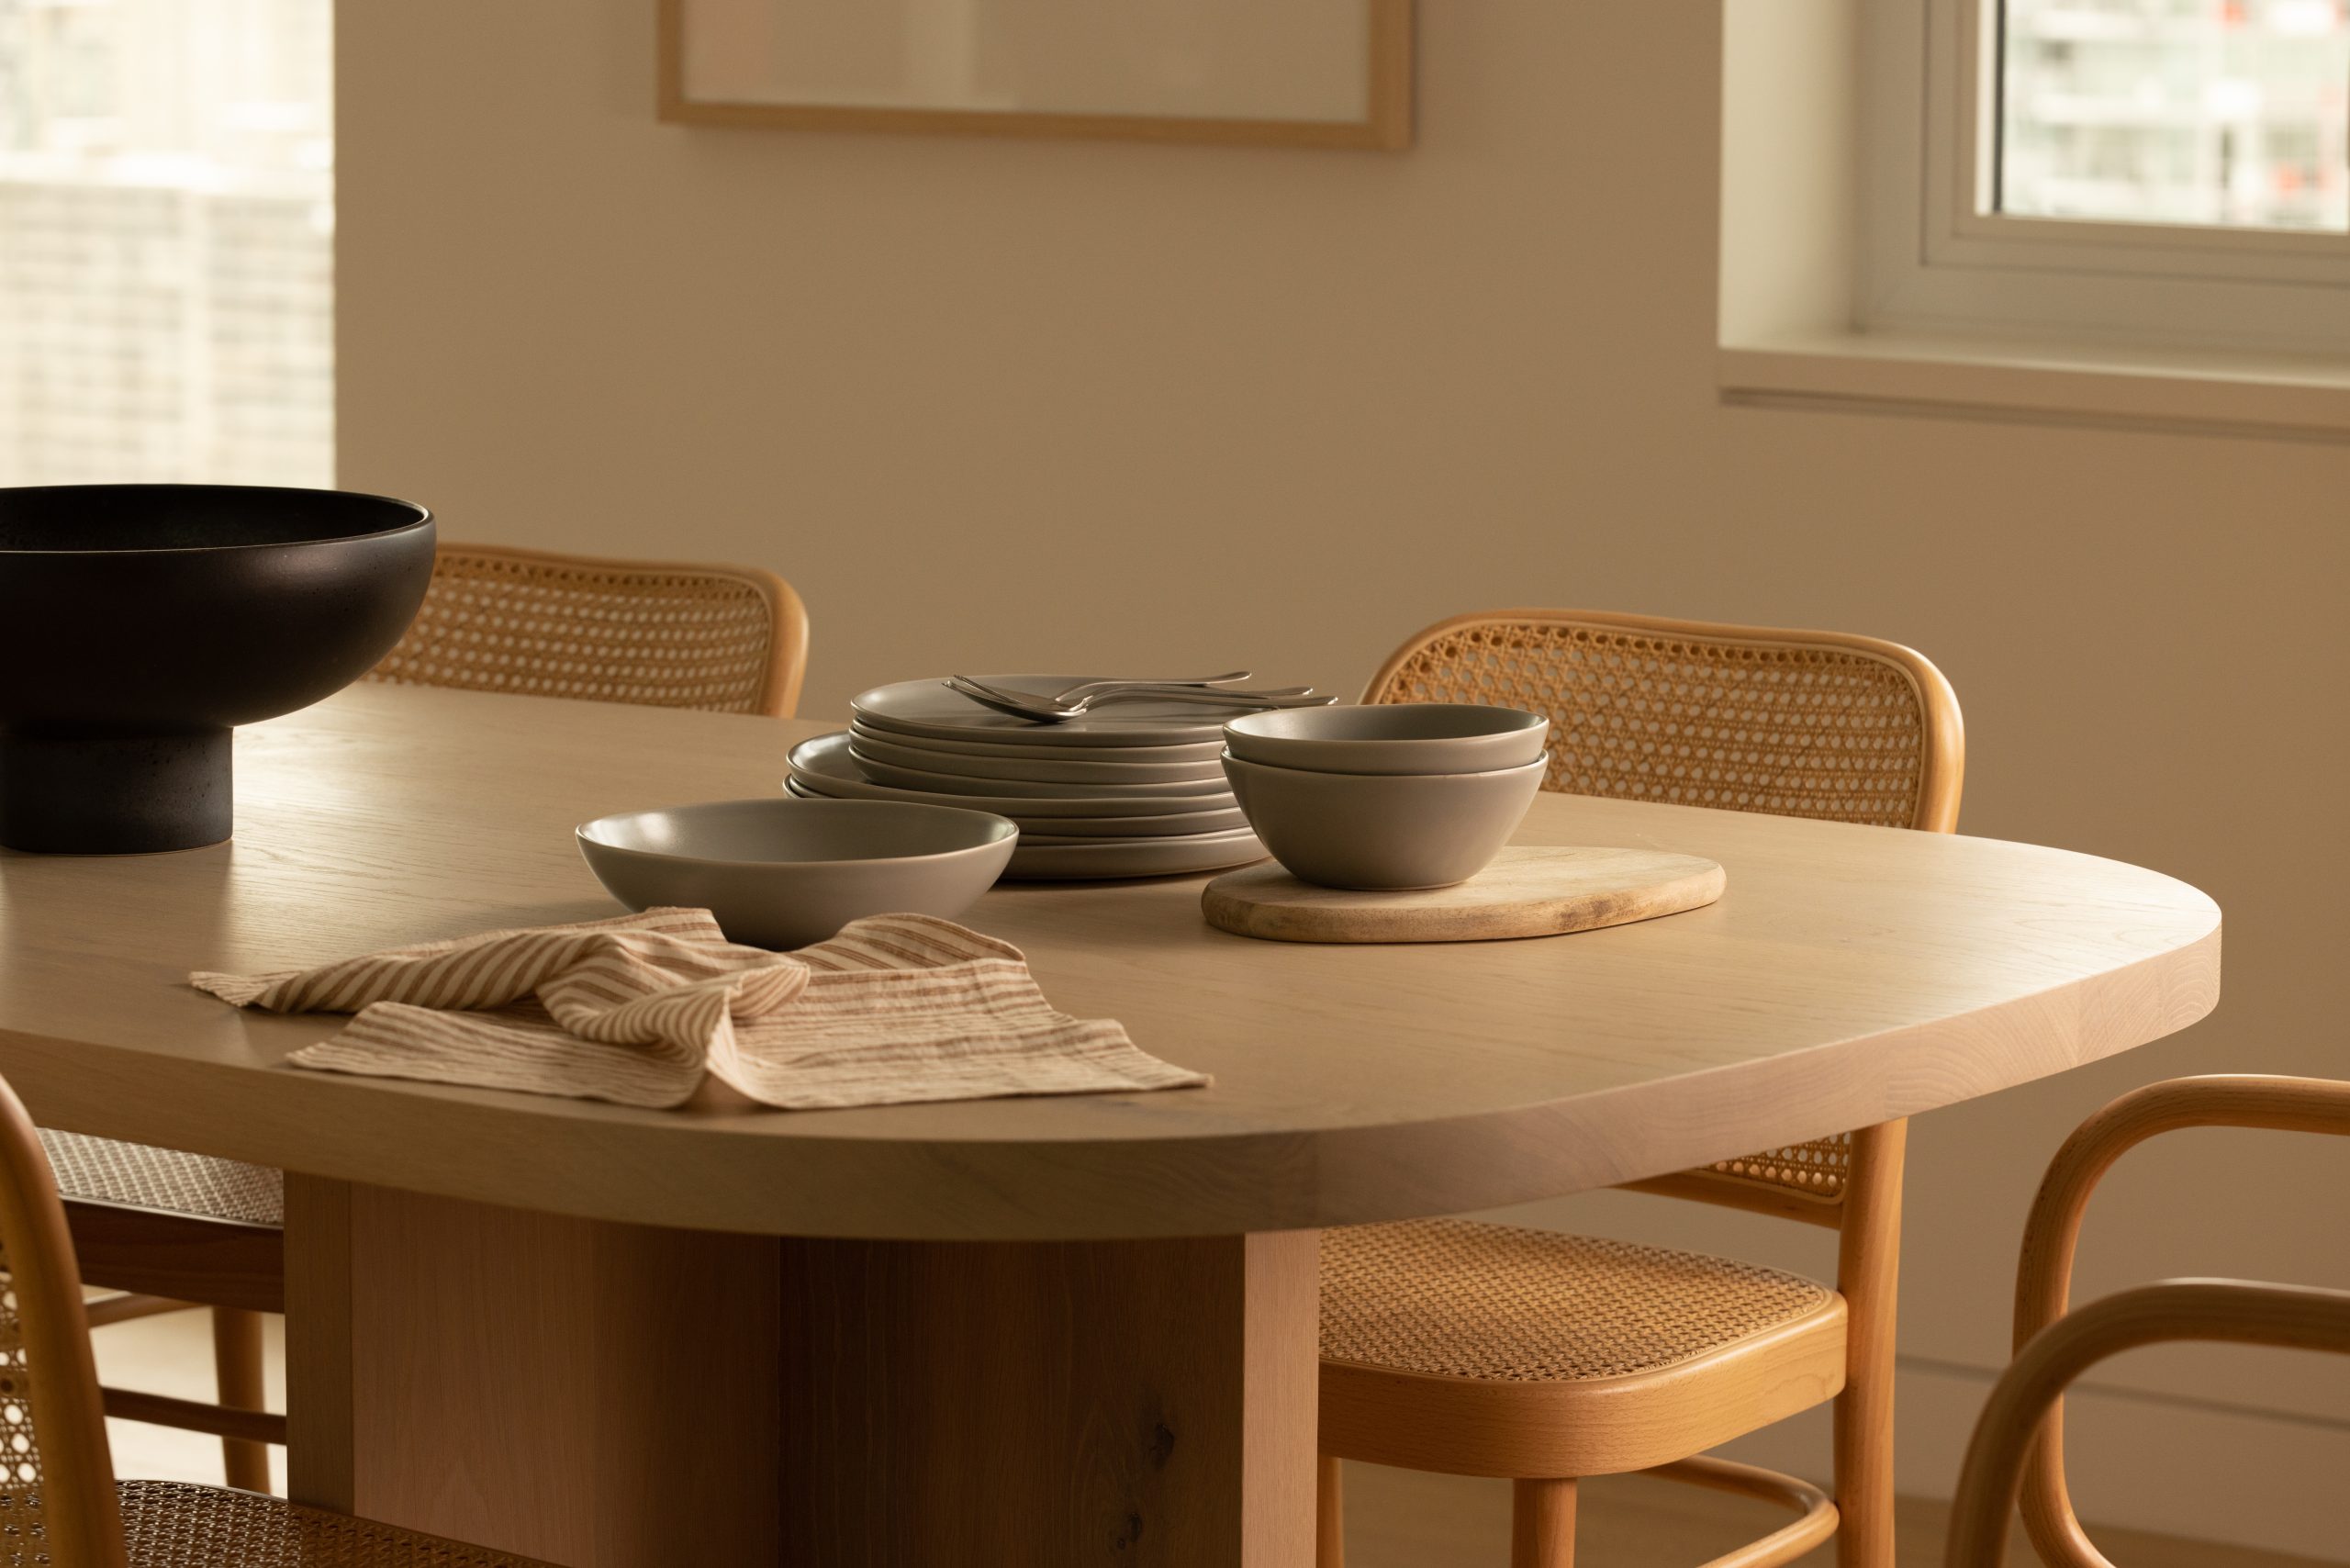 Fable kitchenware on table